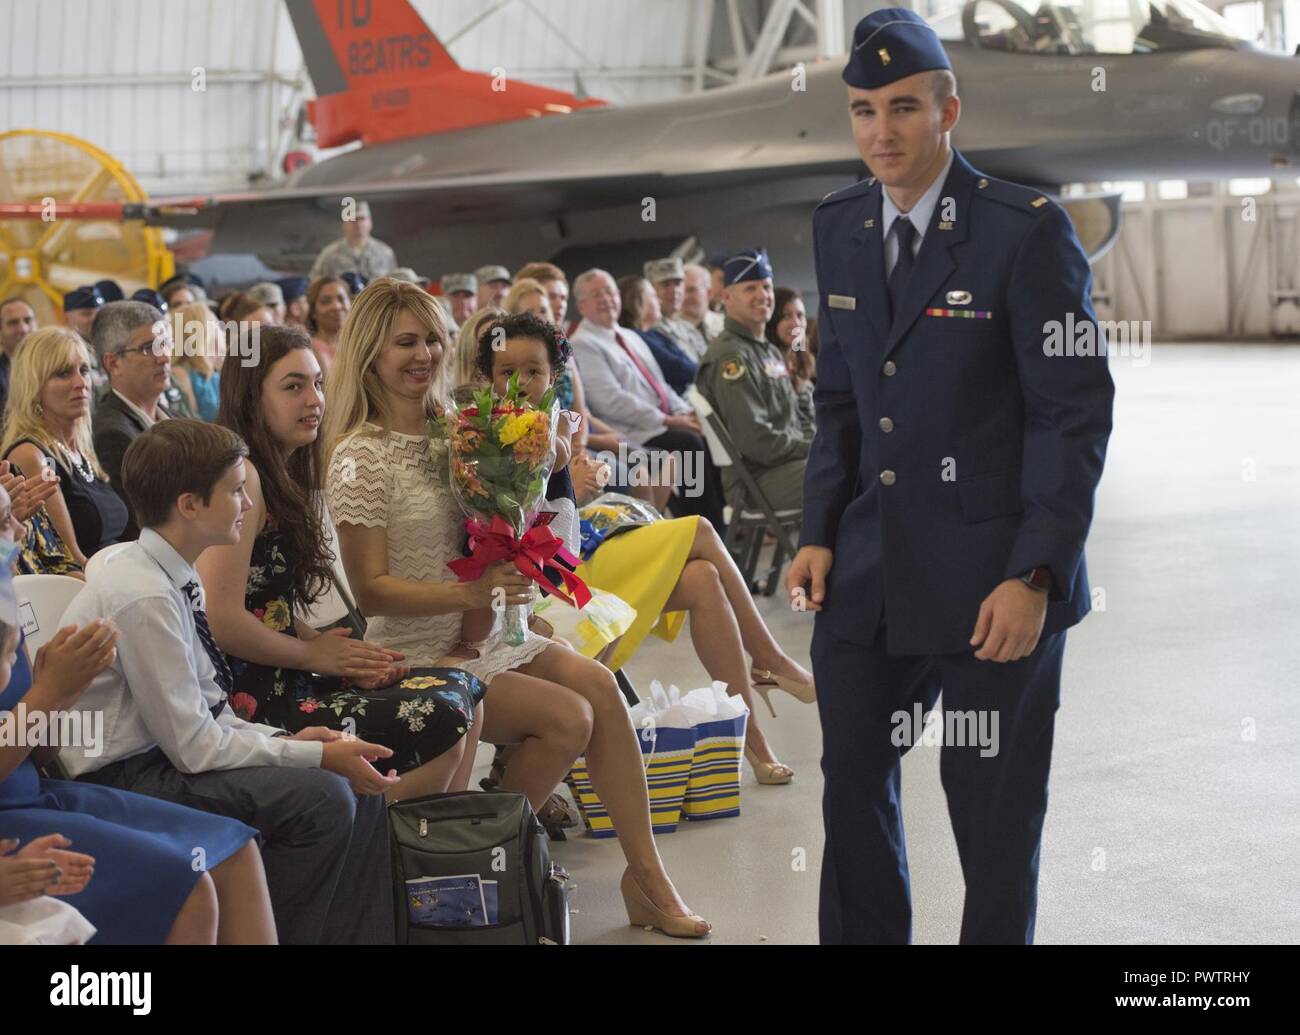 Carla Abba glances down at the bouquet of flowers from her husband, Col. David Abba, the new 53rd  Wing commander, during his change of command June 20 at EglinAir Force Base, Fla. The wing also welcomed their children. Nyah, Jack, Serena, Lauren and Lani. Stock Photo